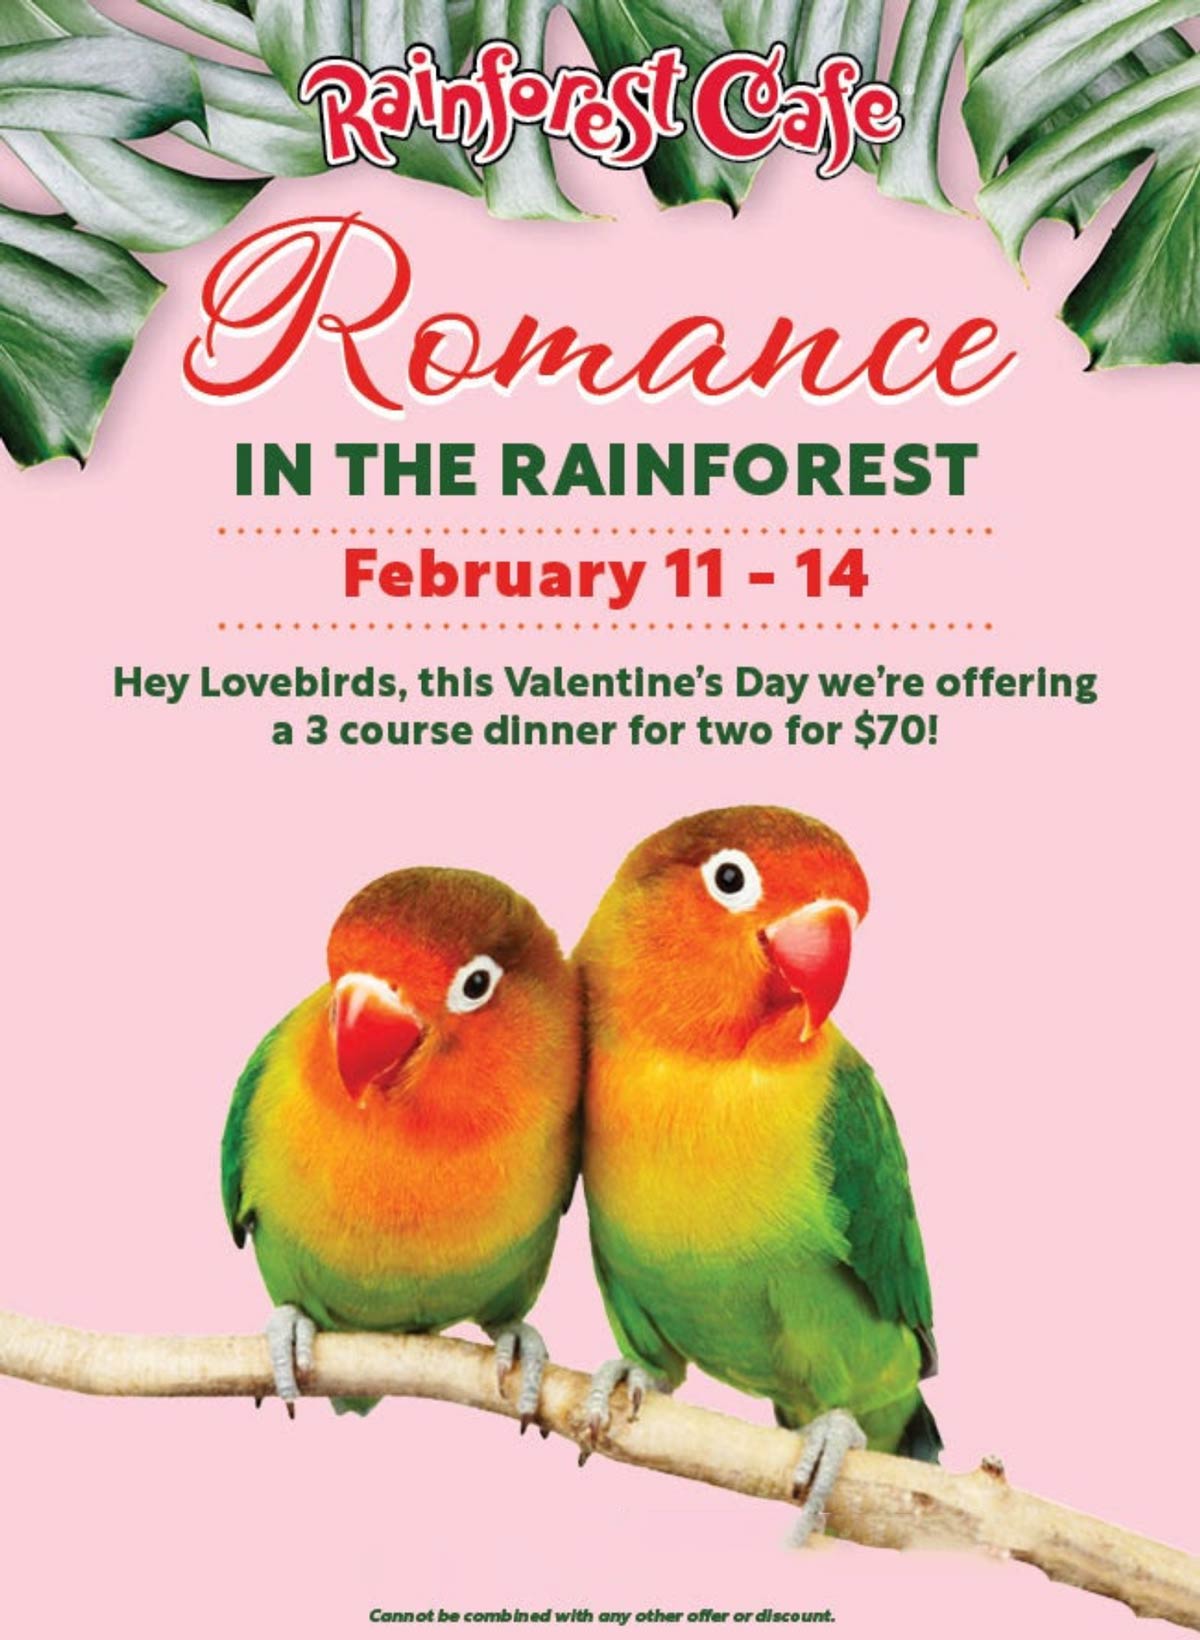 Rainforest Cafe coupons & promo code for [November 2022]